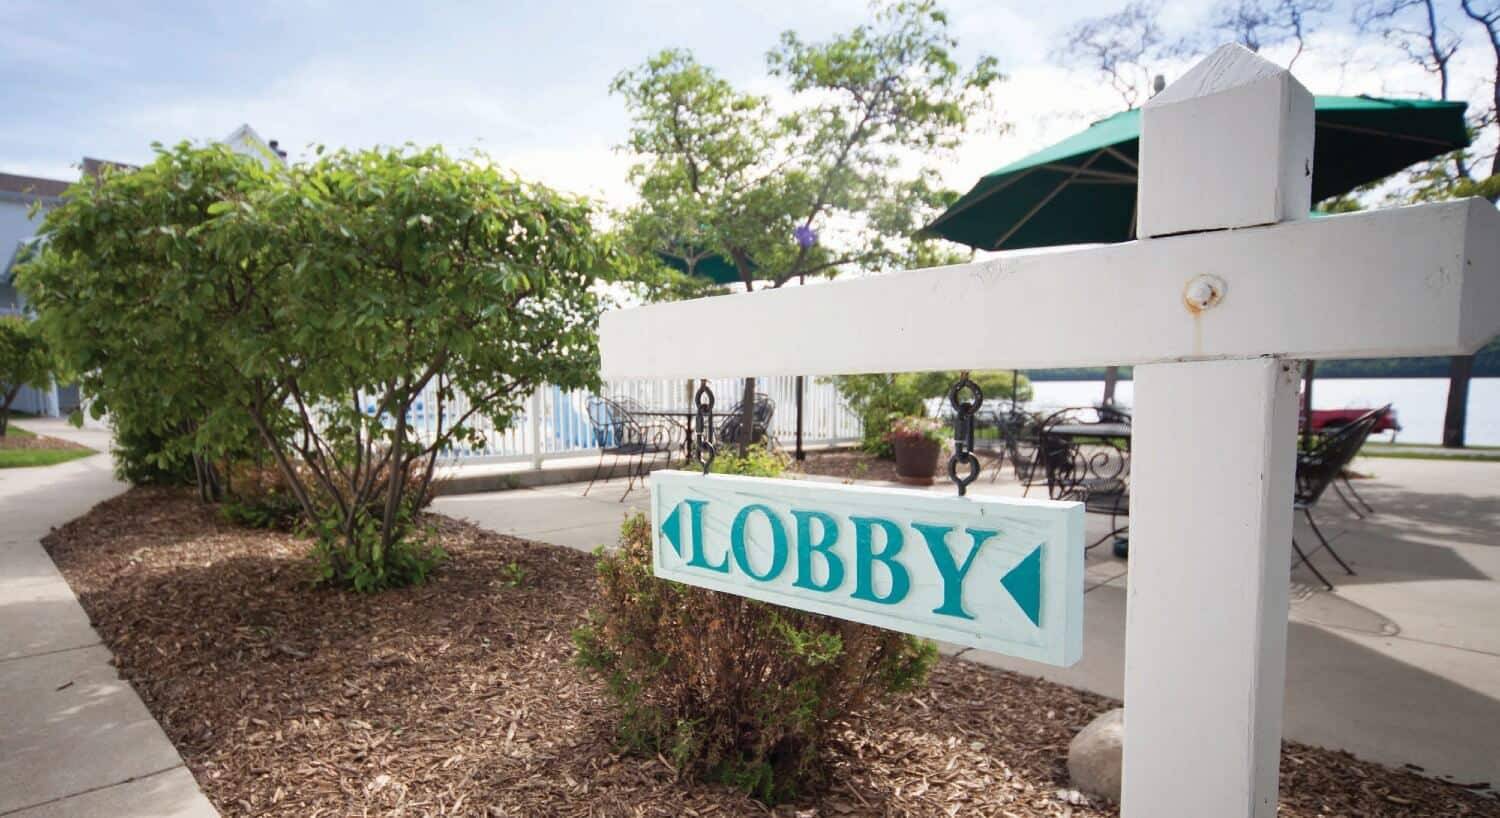 Sign pointing towards a lobby on a white post near trees and an outdoor patio table